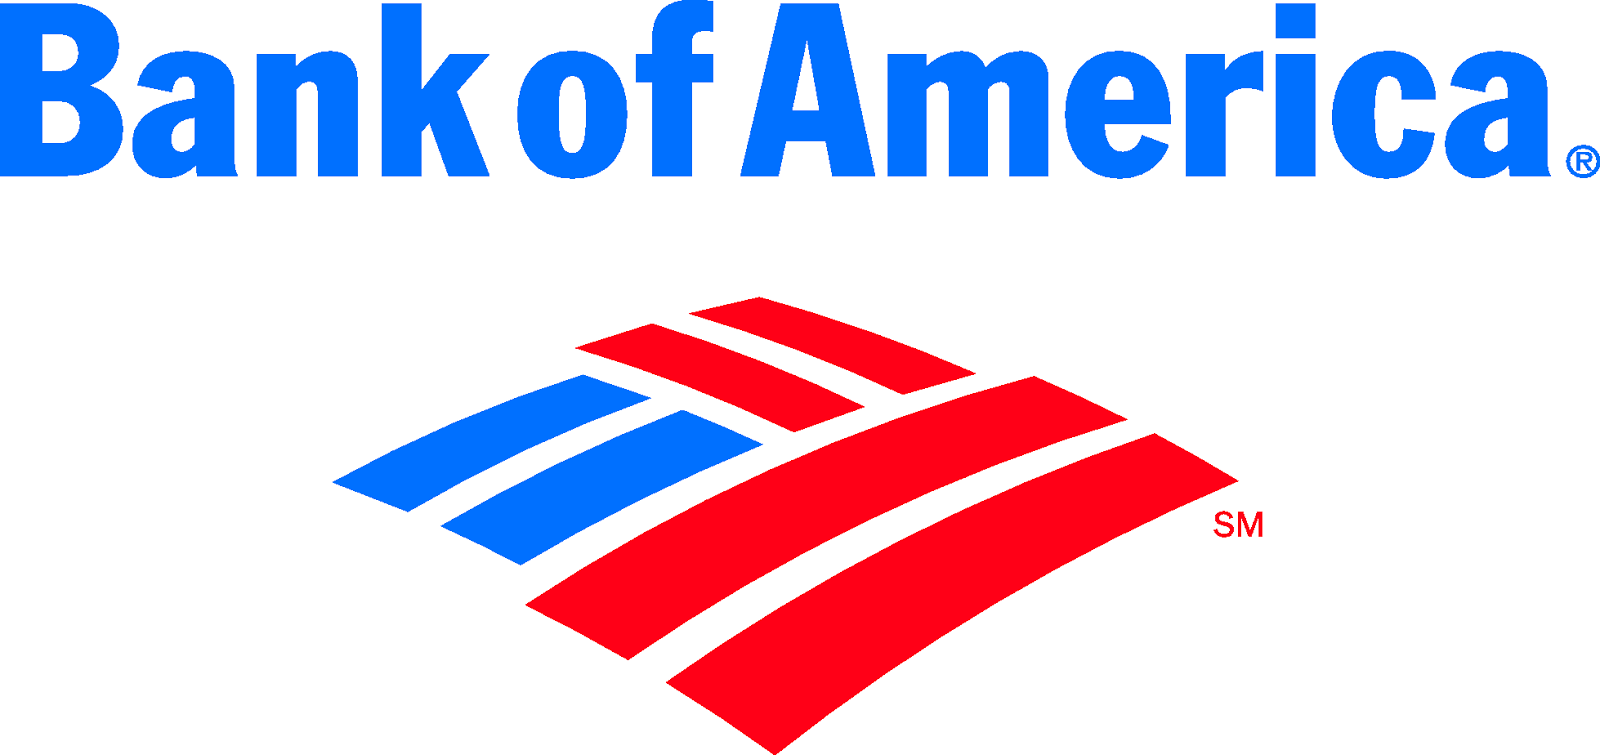 History of All Logos: All Bank of America